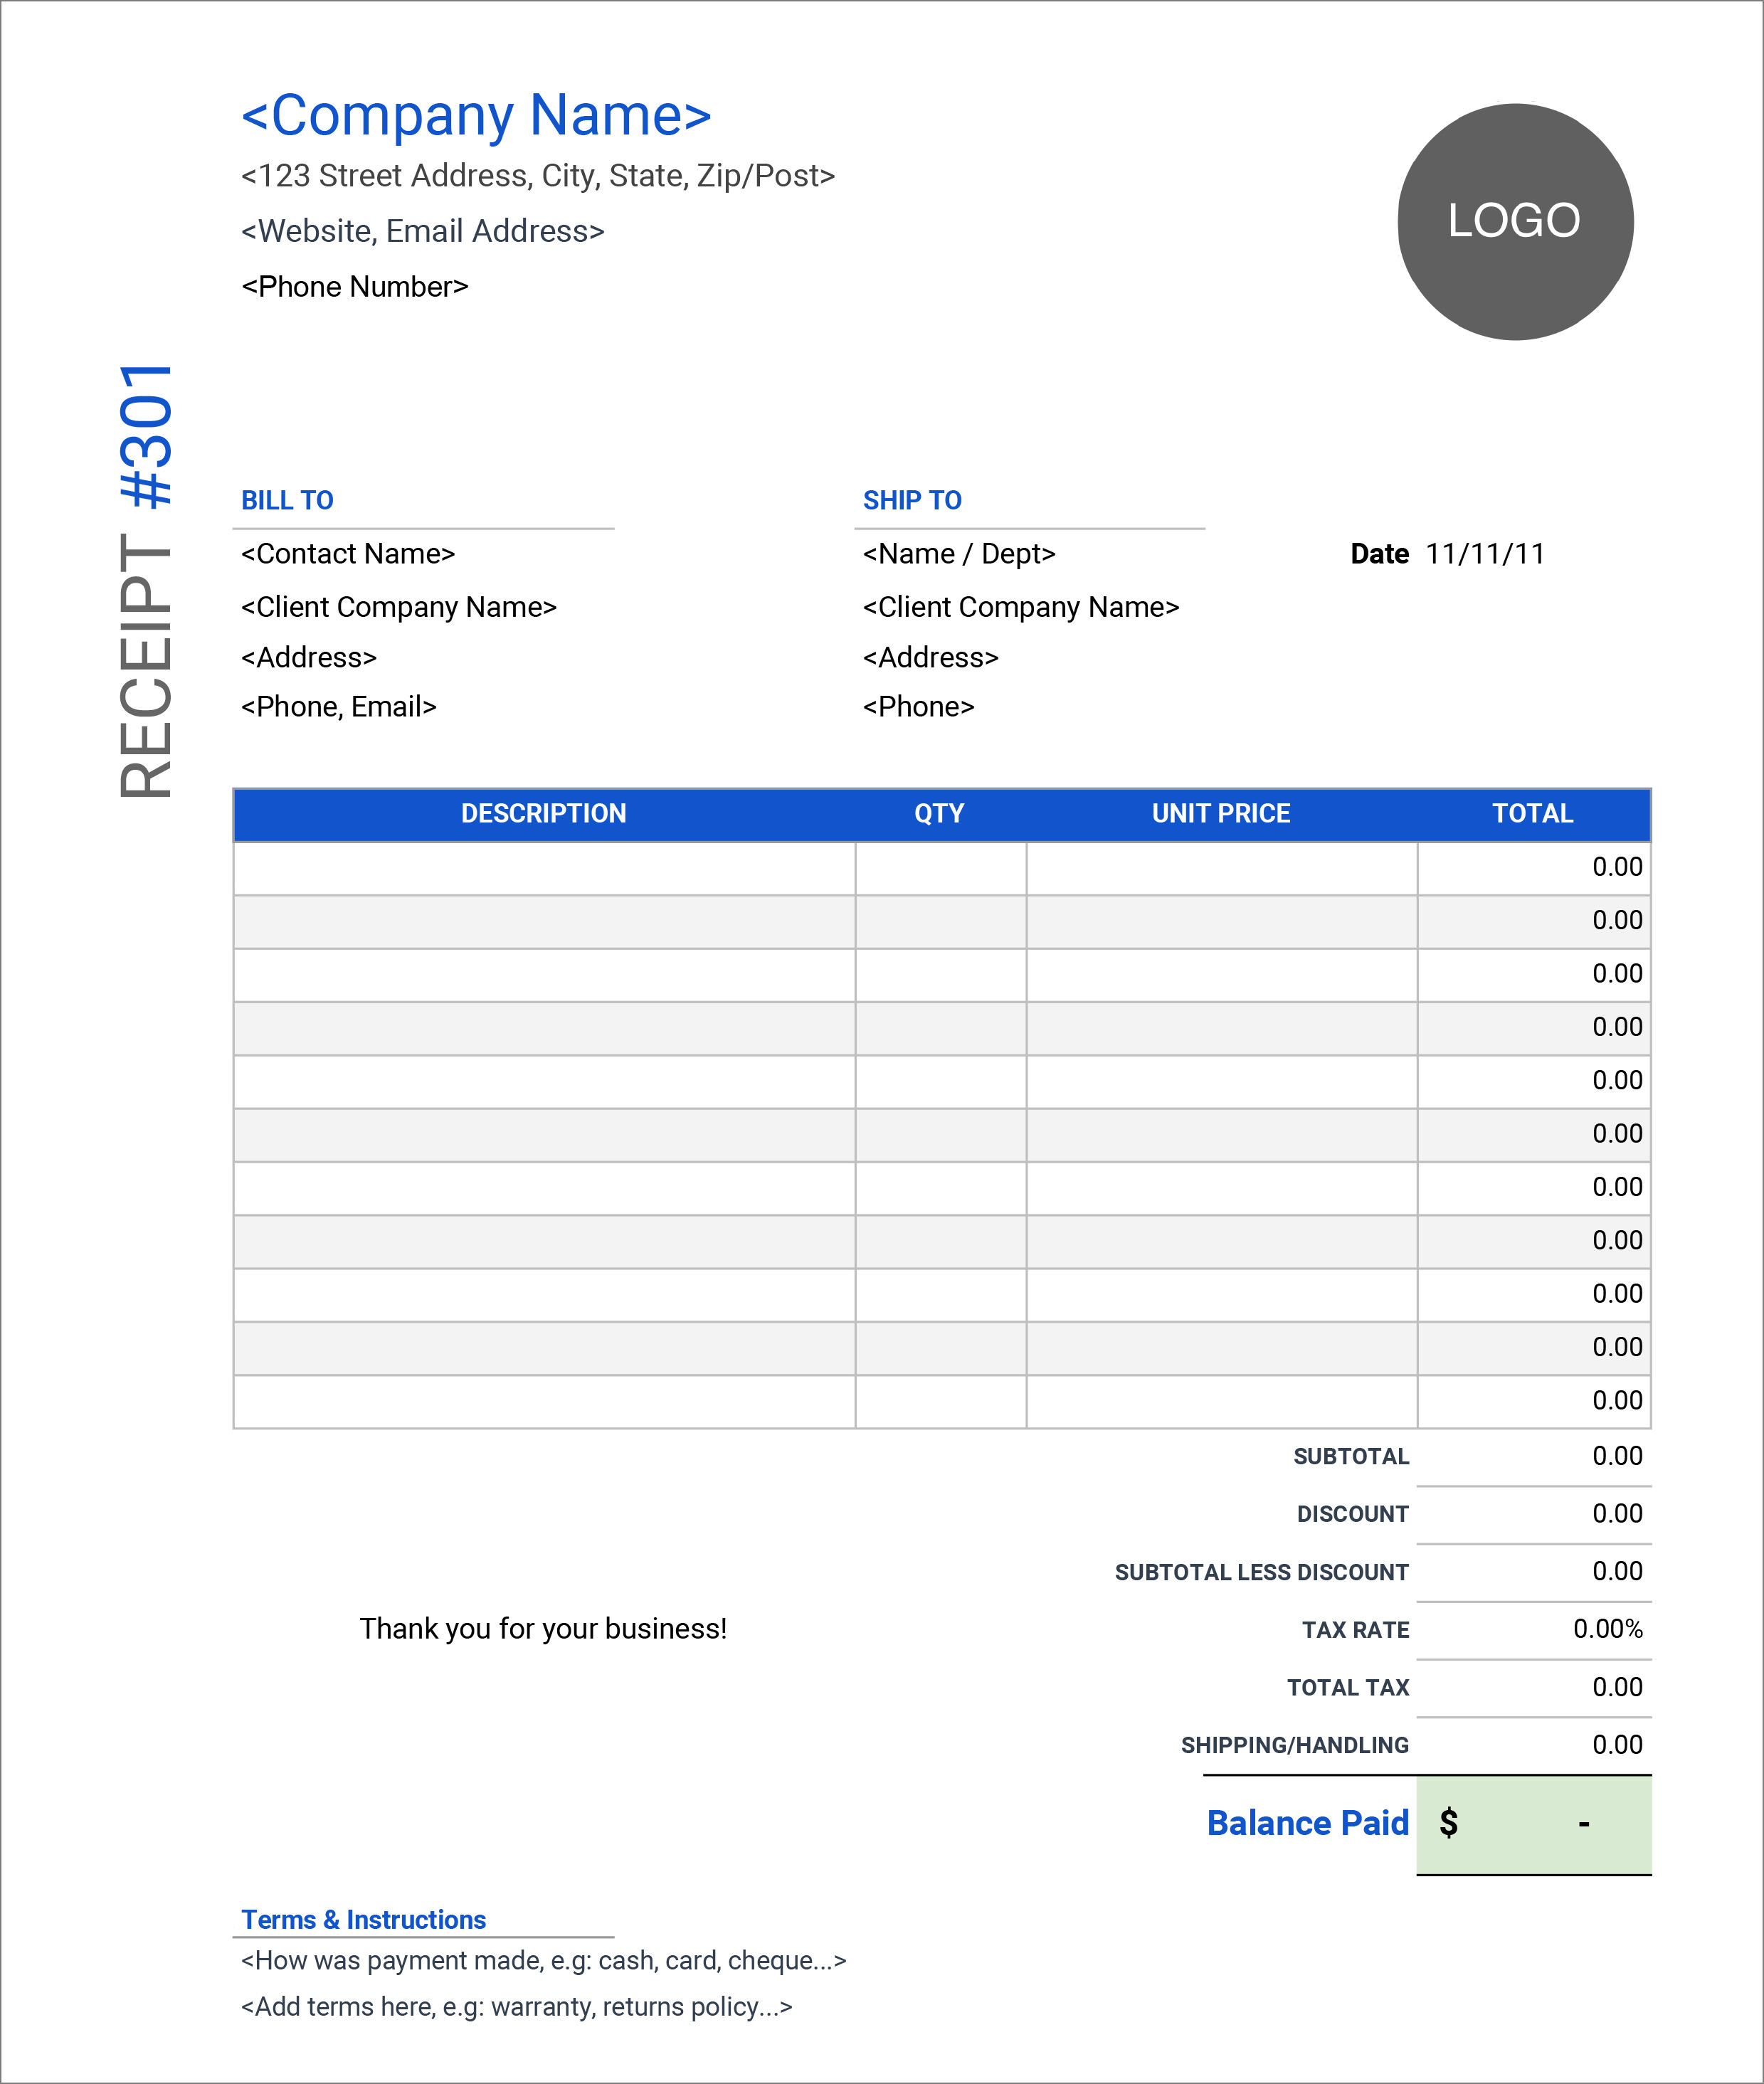 22 Free Receipt Templates - Download For Microsoft Word, Excel Within Free Invoice Template Word Mac